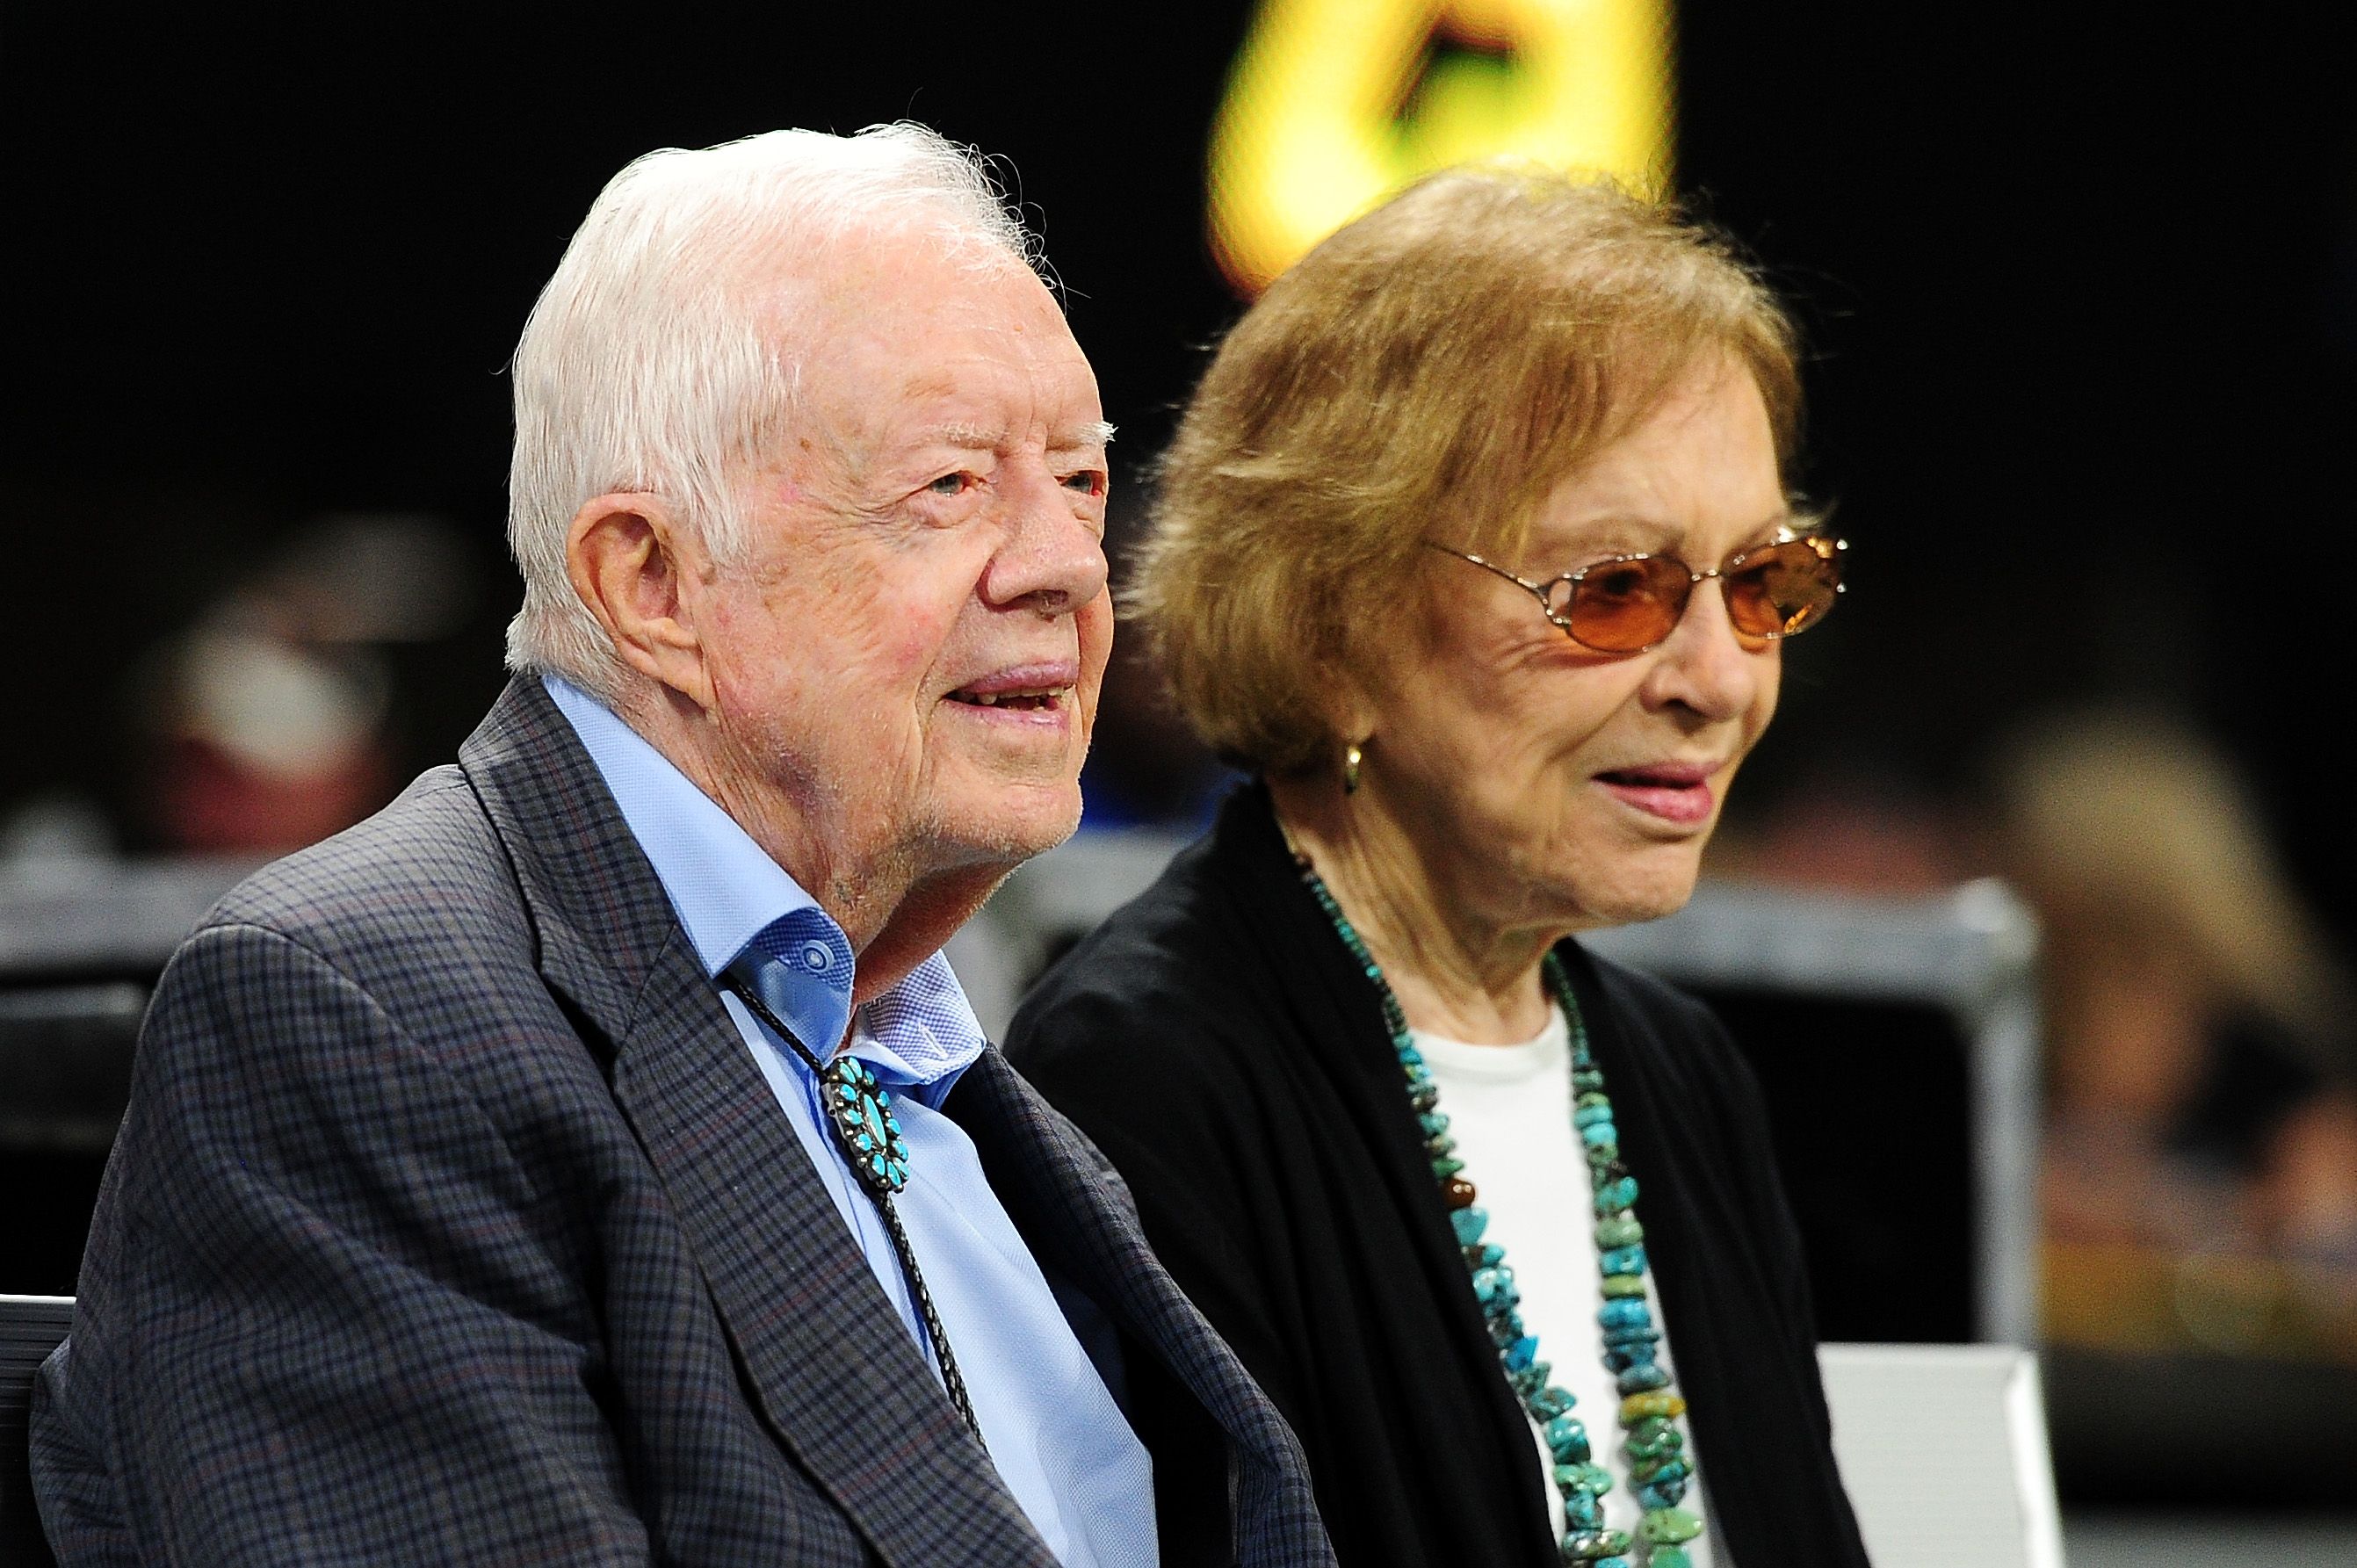 Former president Jimmy Carter and his wife Rosalynn at the game between the Atlanta Falcons and the Cincinnati Bengals at Mercedes-Benz Stadium on September 30, 2018 | Photo: Getty Images